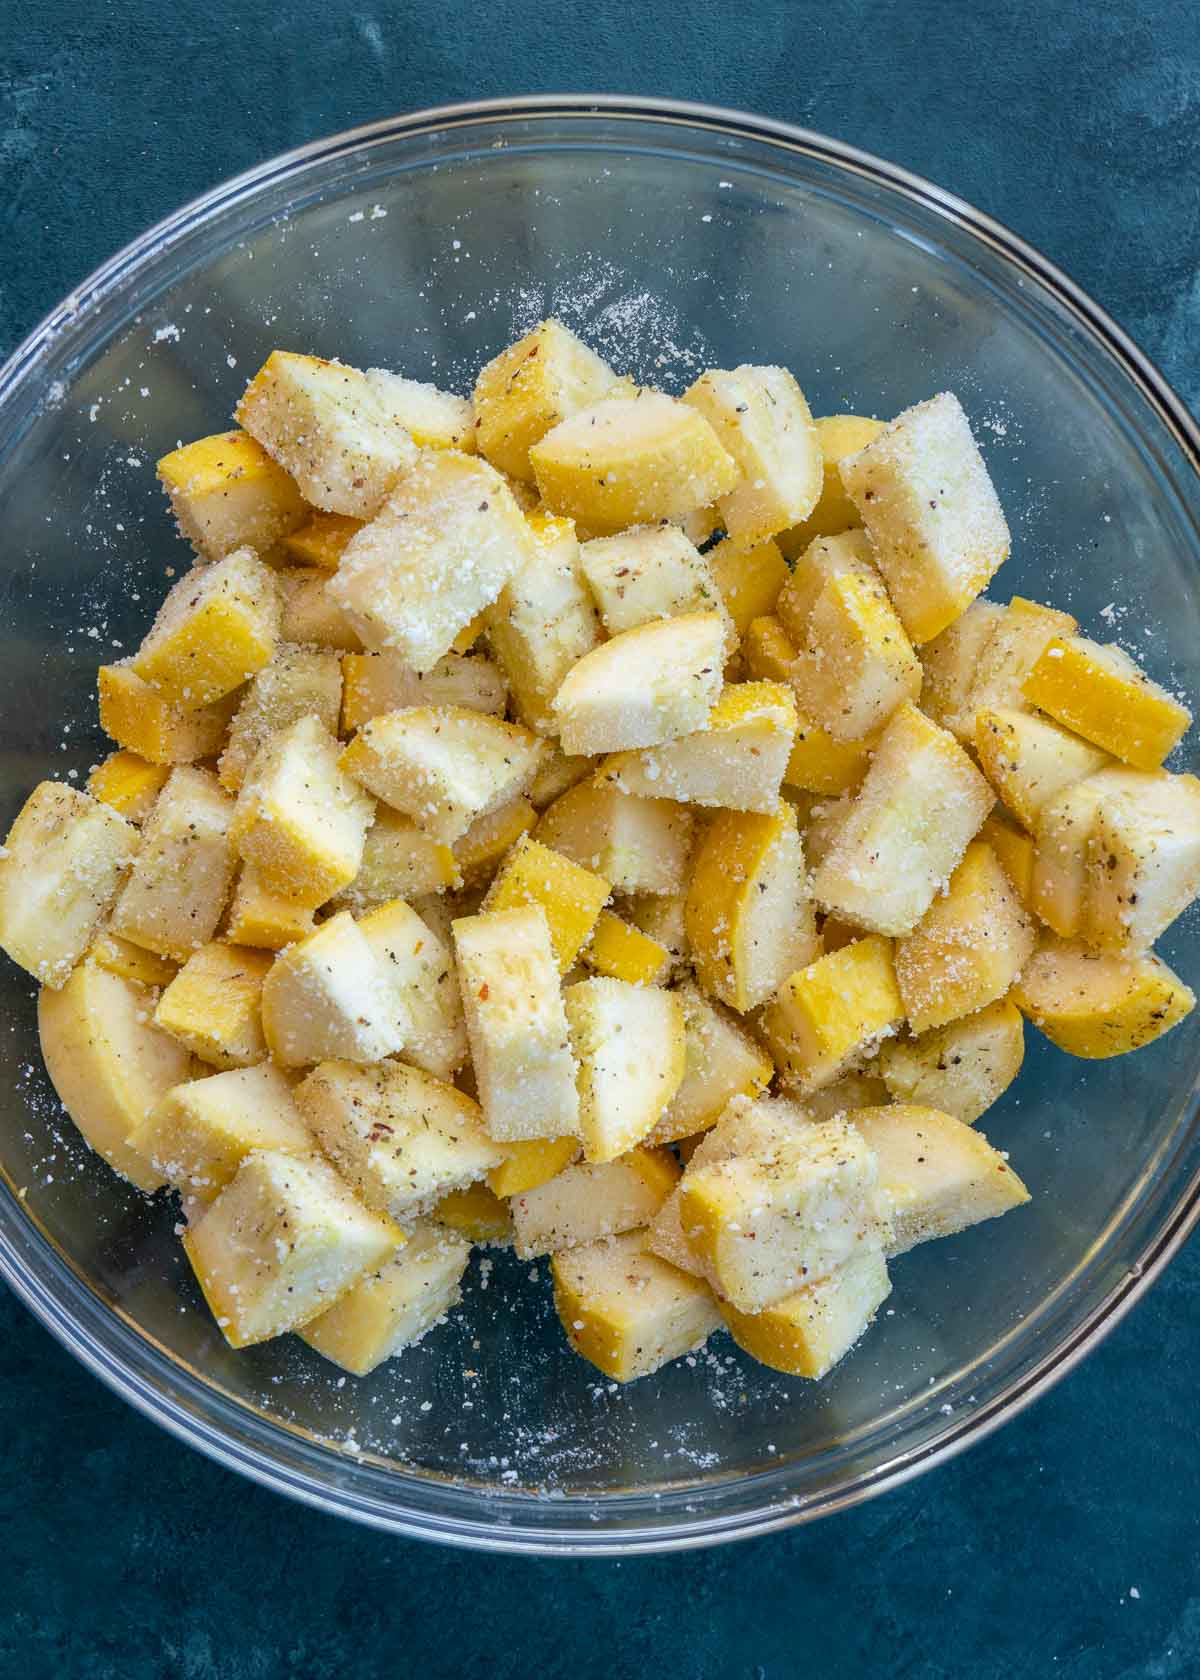 Squash tossed in oil, spices and parmesan